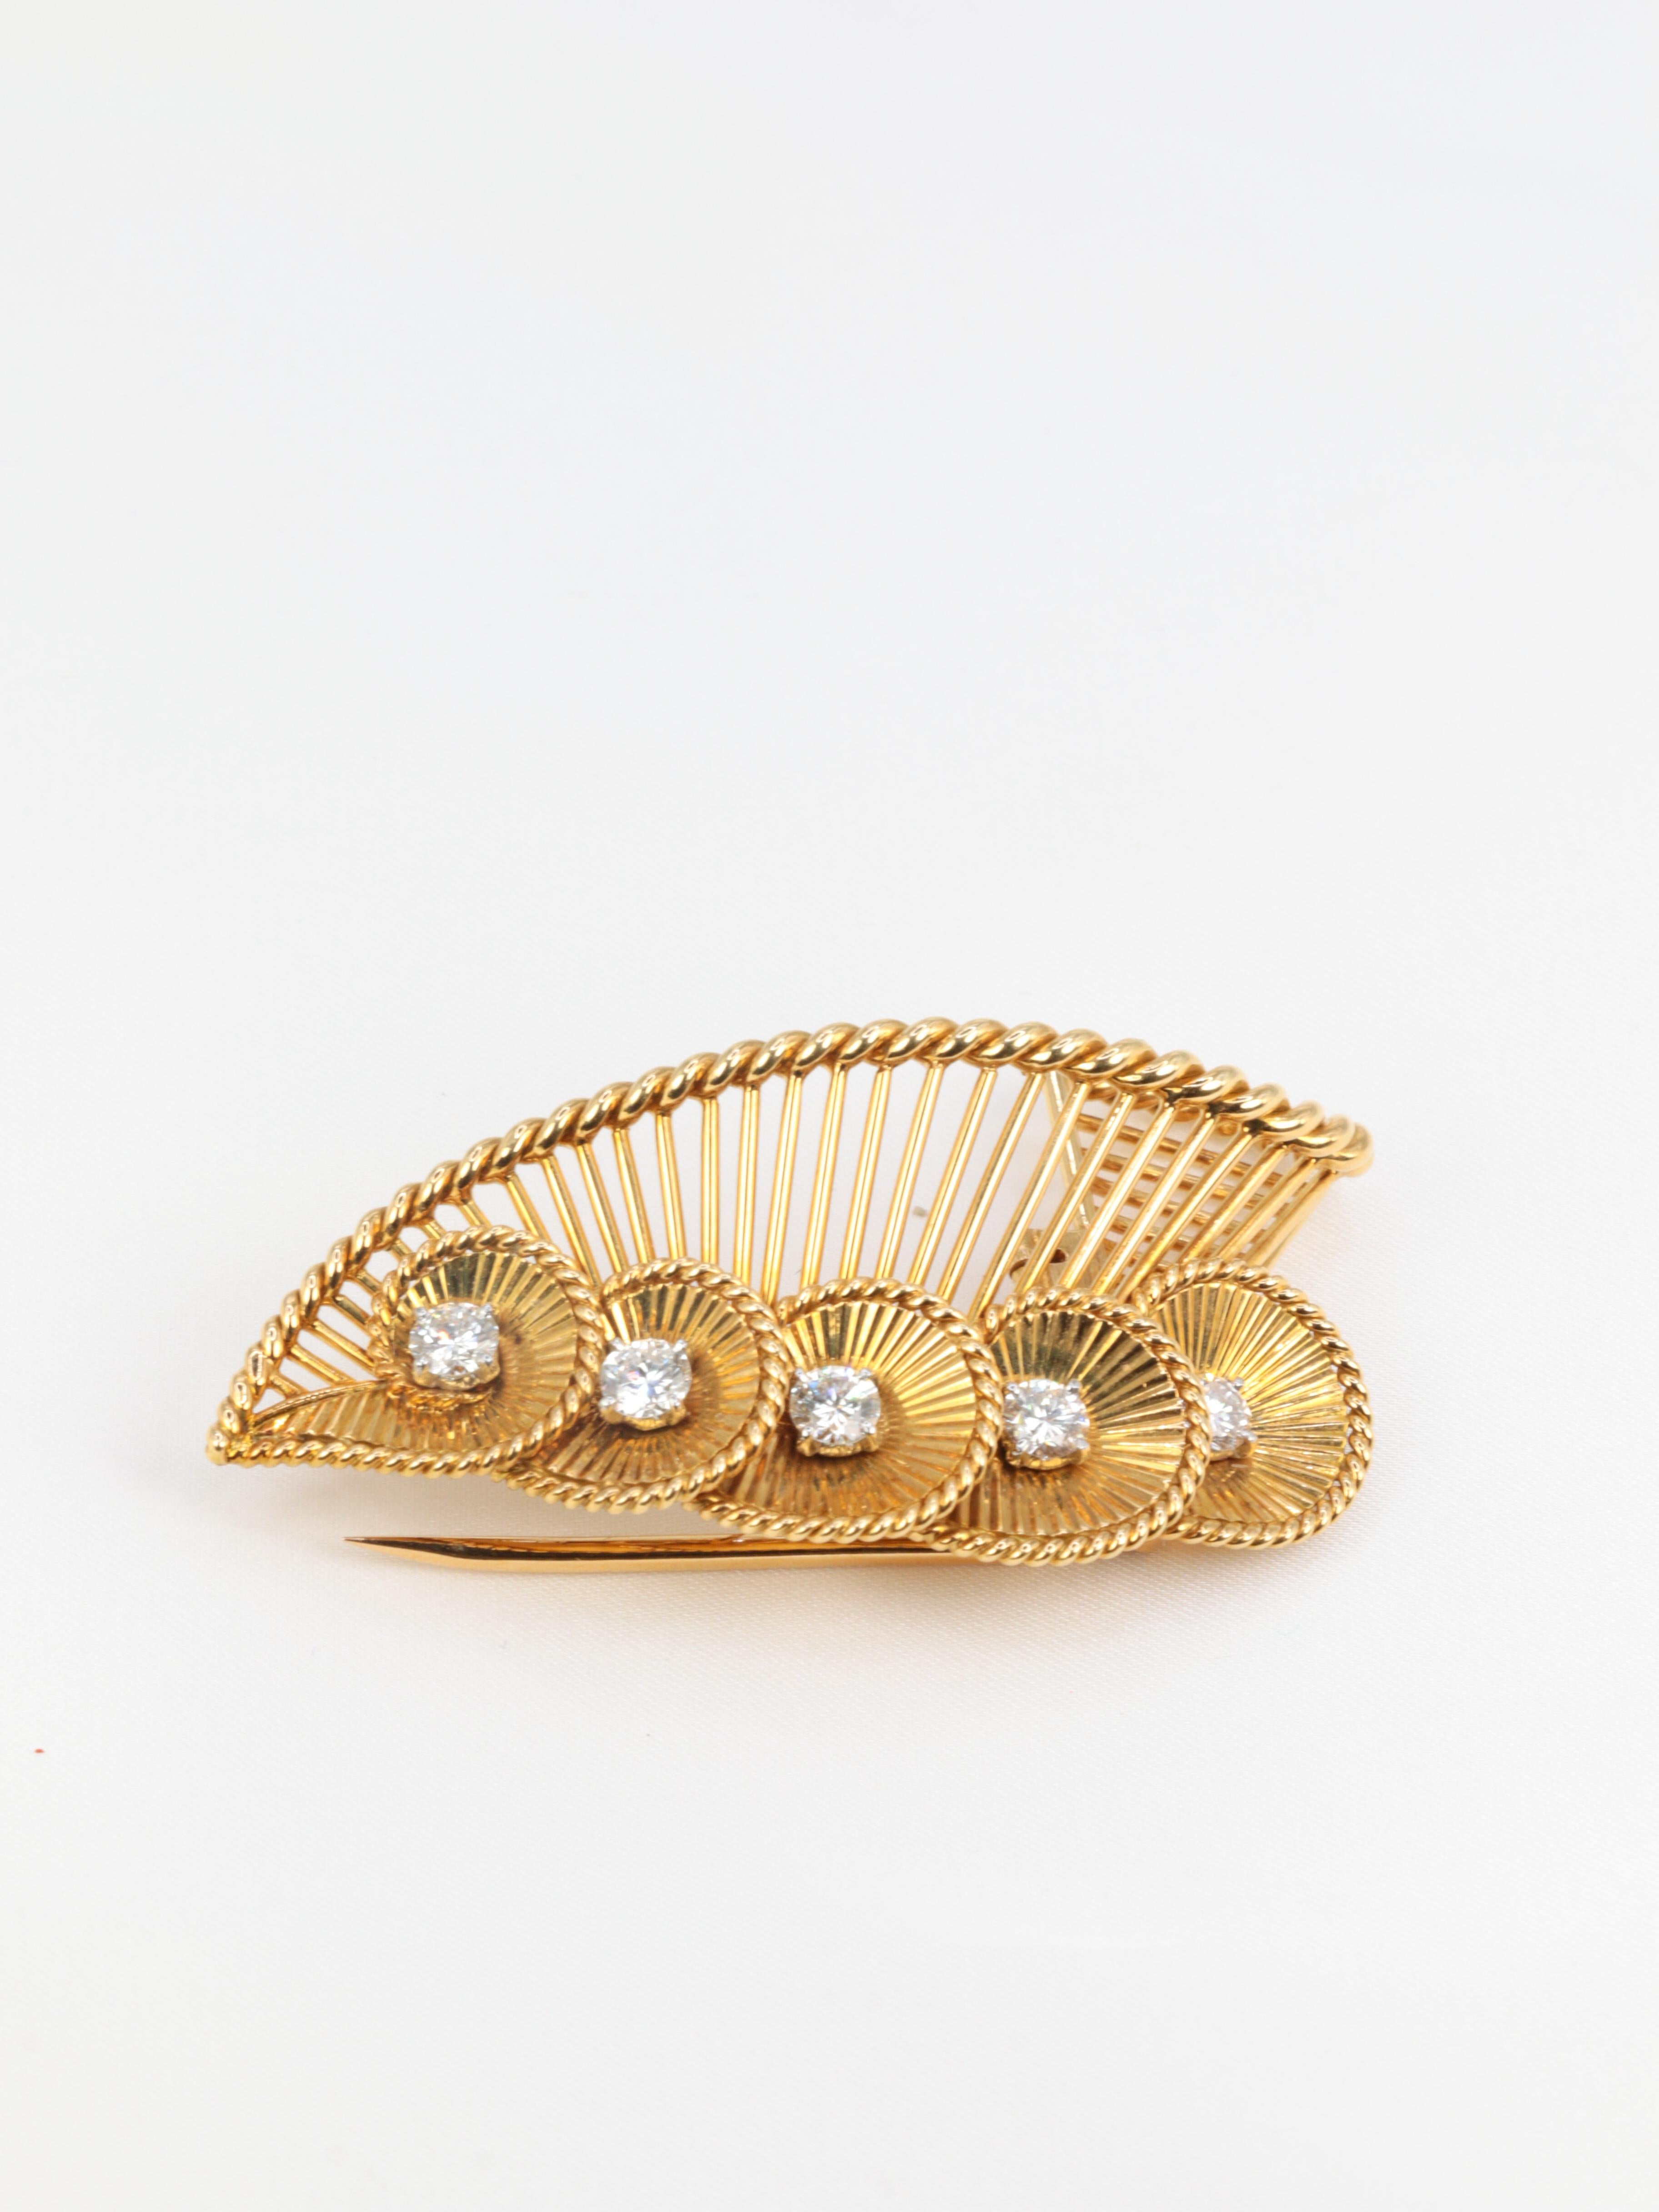 Gold Vintage Cartier Shell Brooch with Diamonds 1